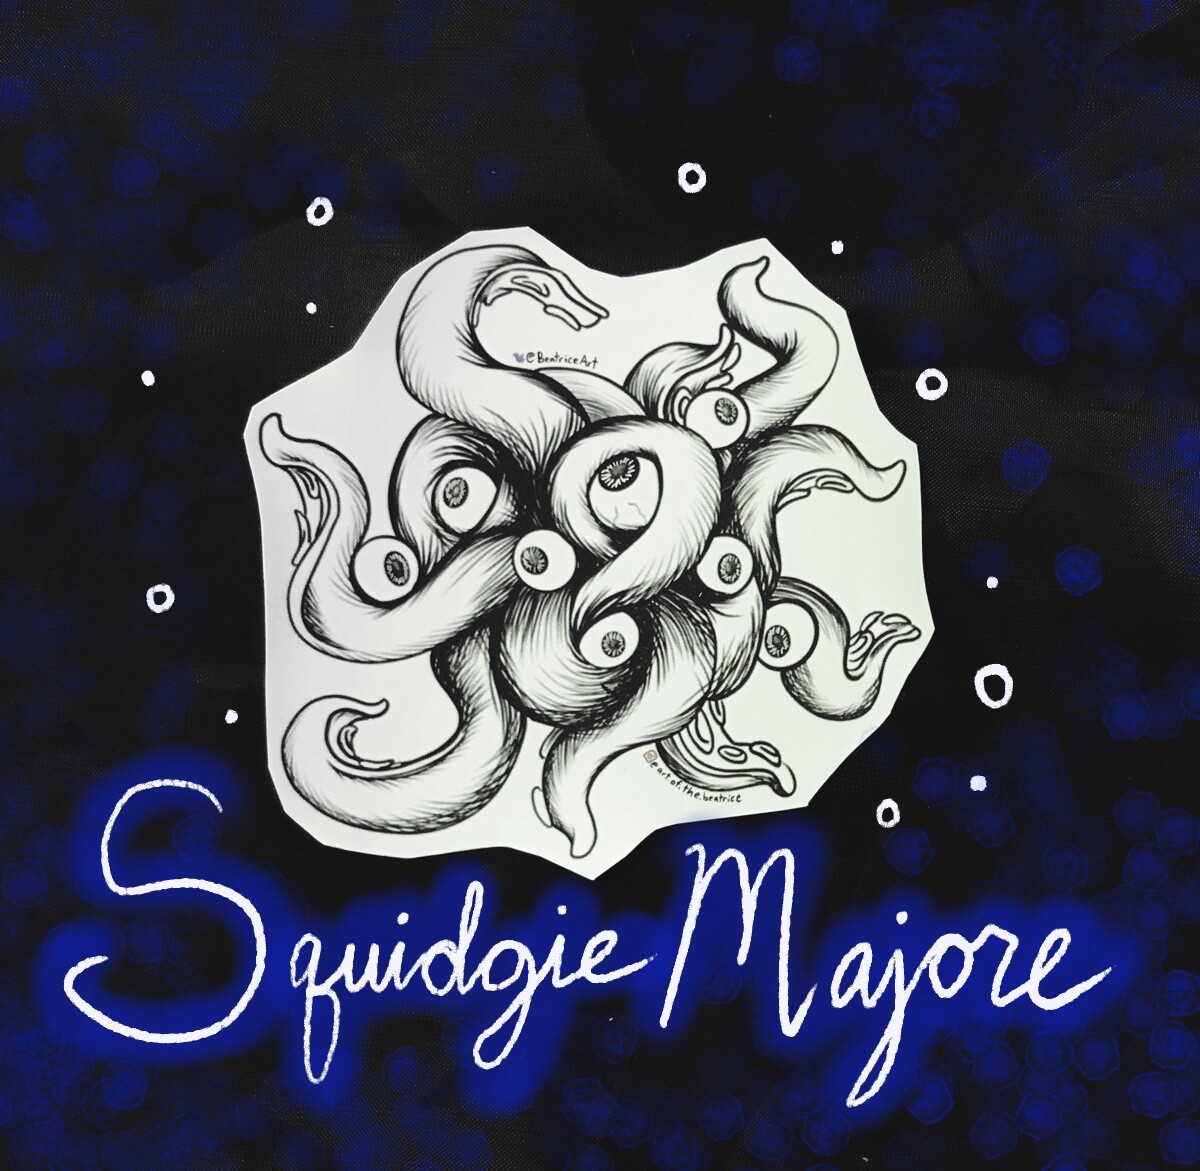 Squidgie Majore, the largest and most complex of the Squidgie sticker set.